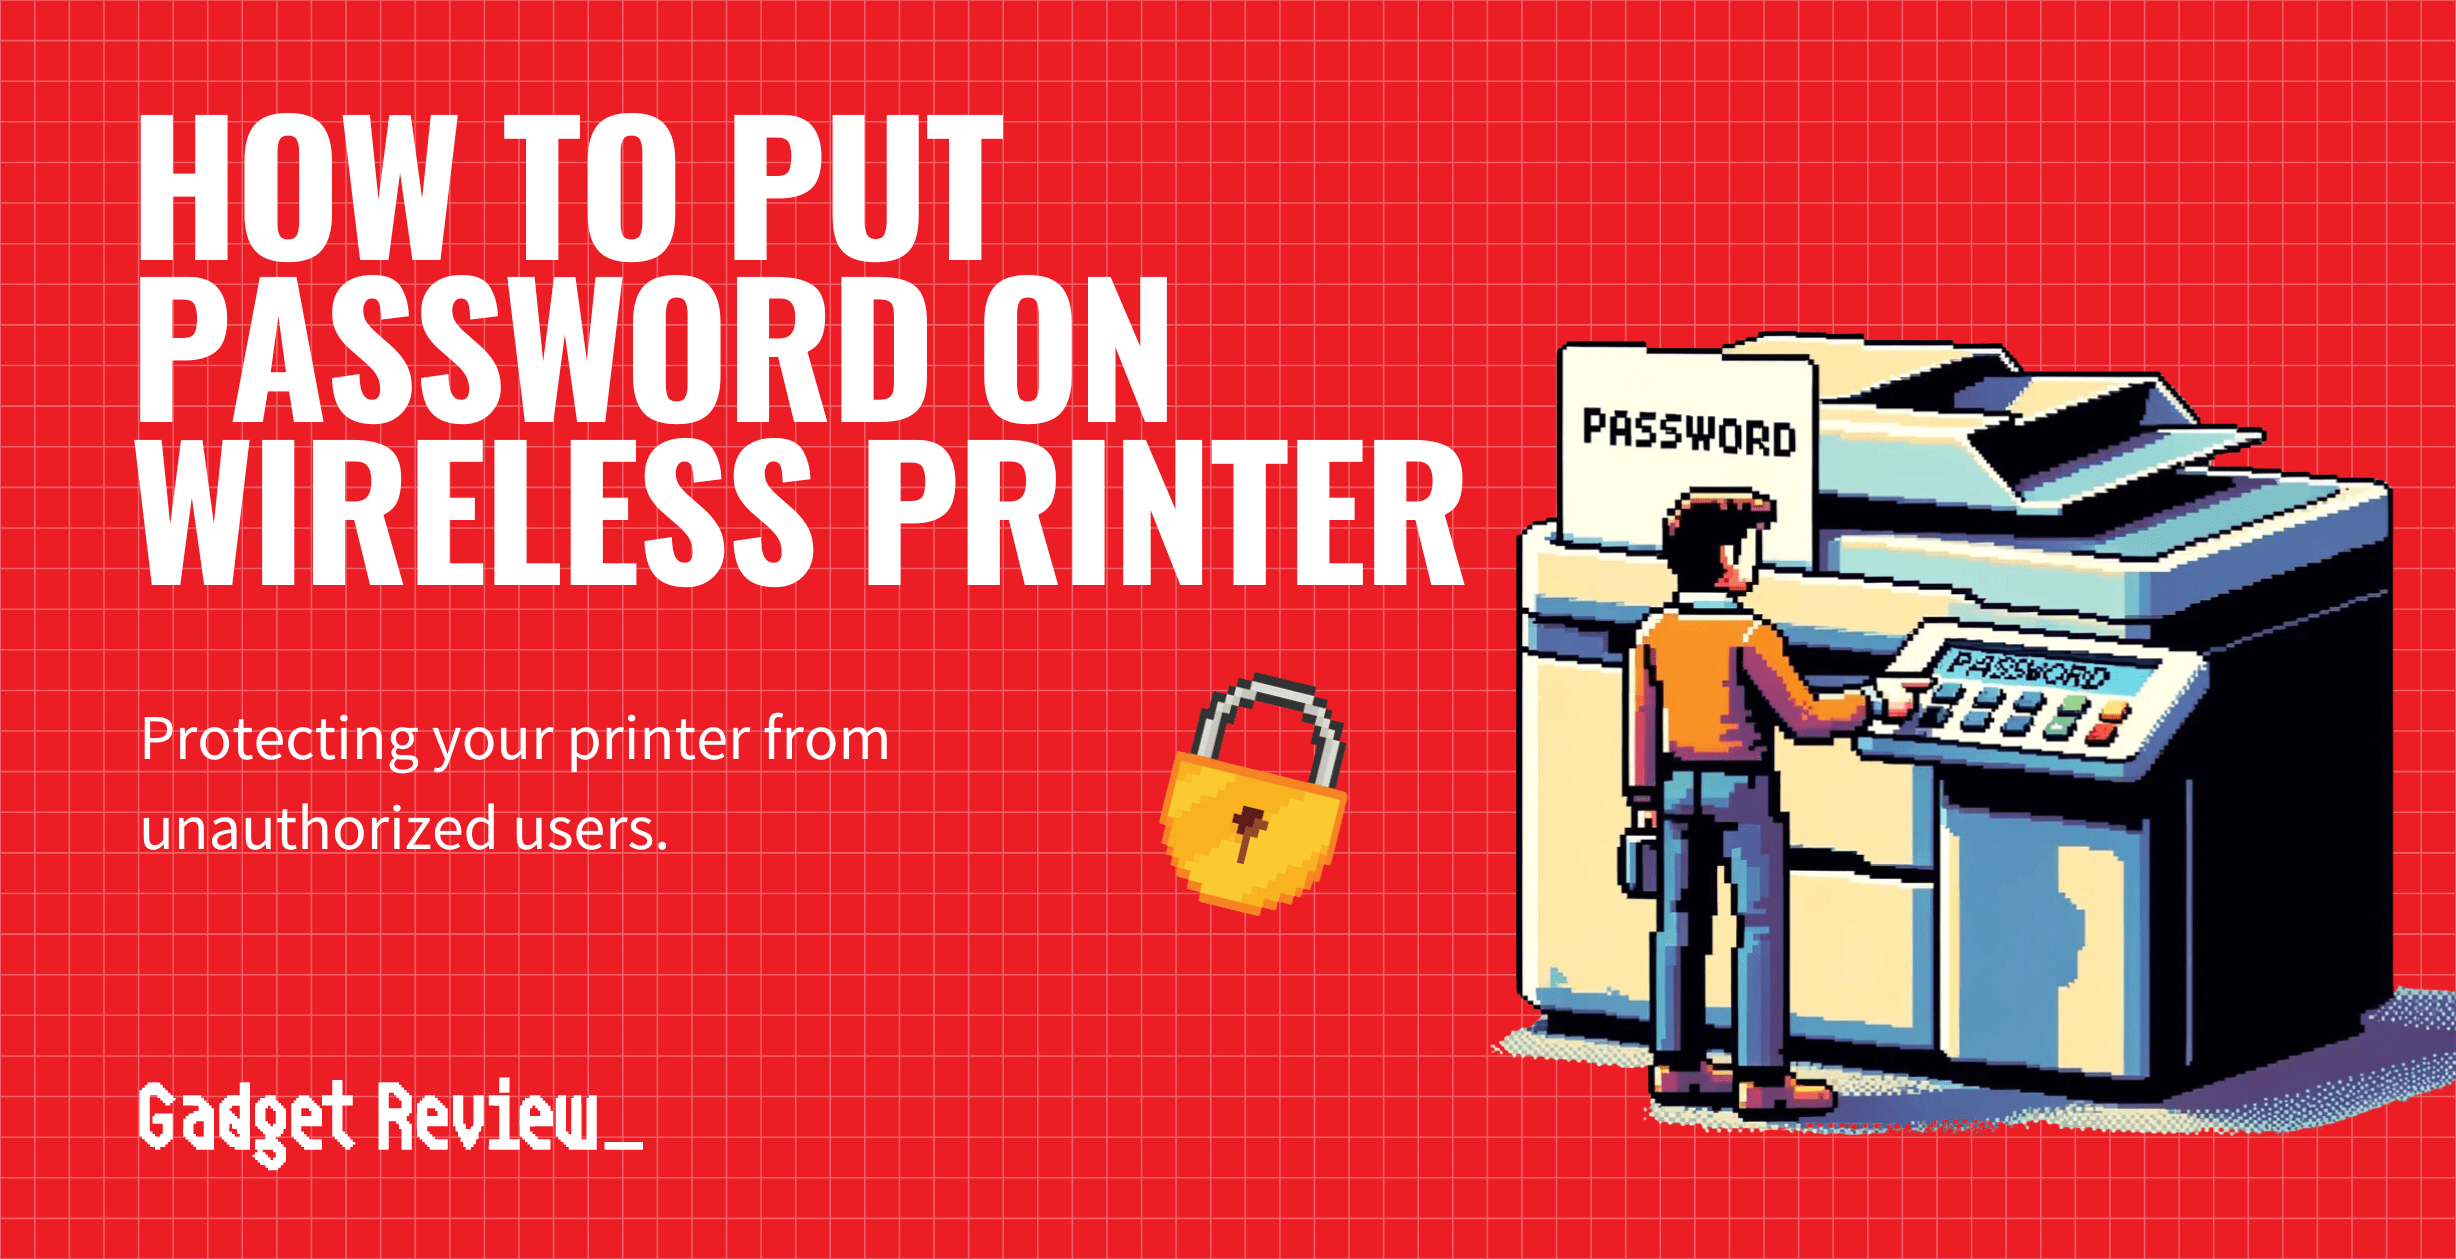 how to put password on wireless printer guide